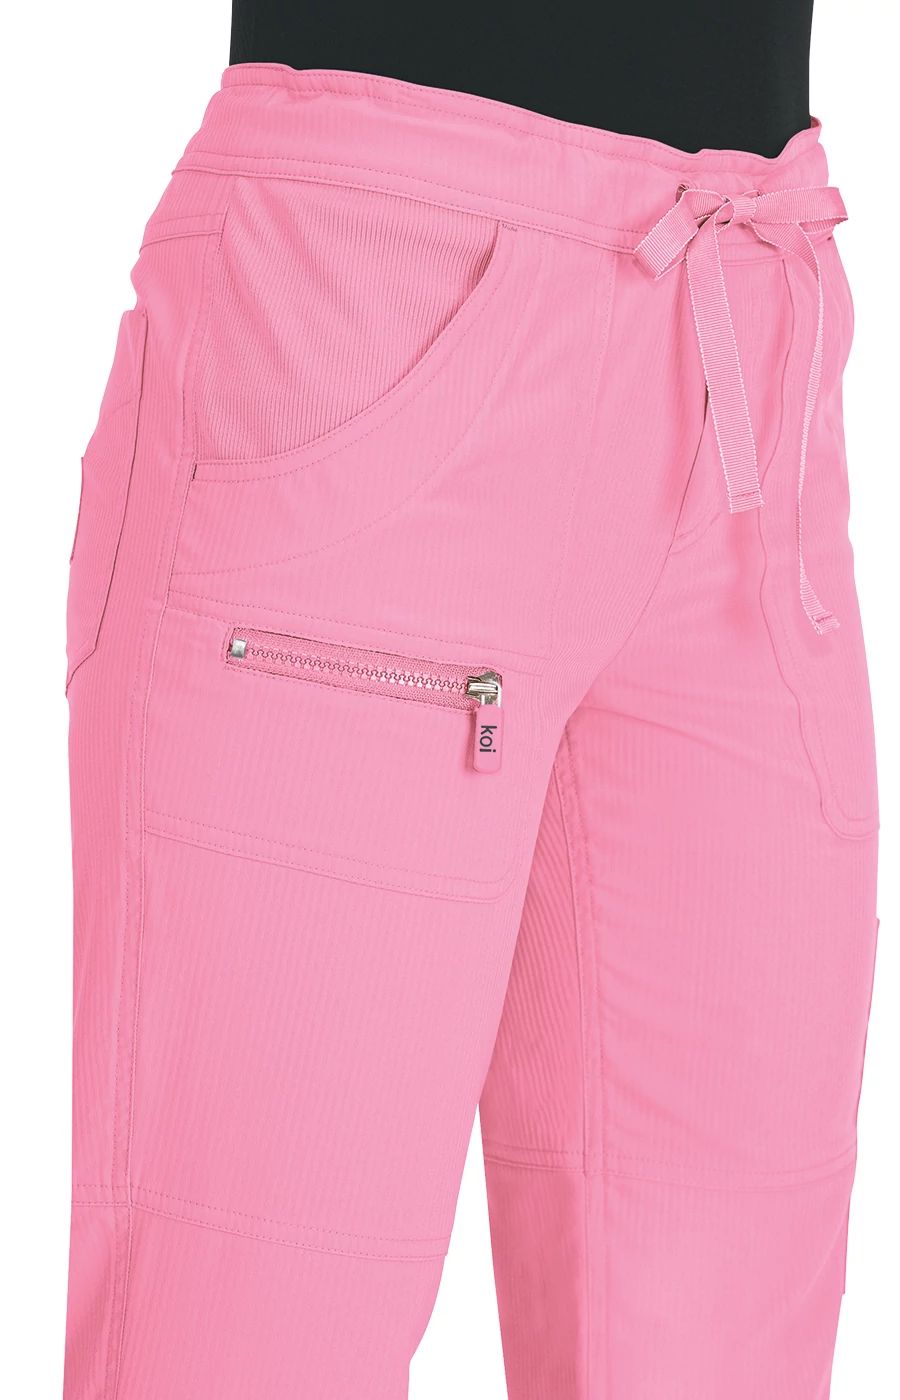 peace-pant-more-pink